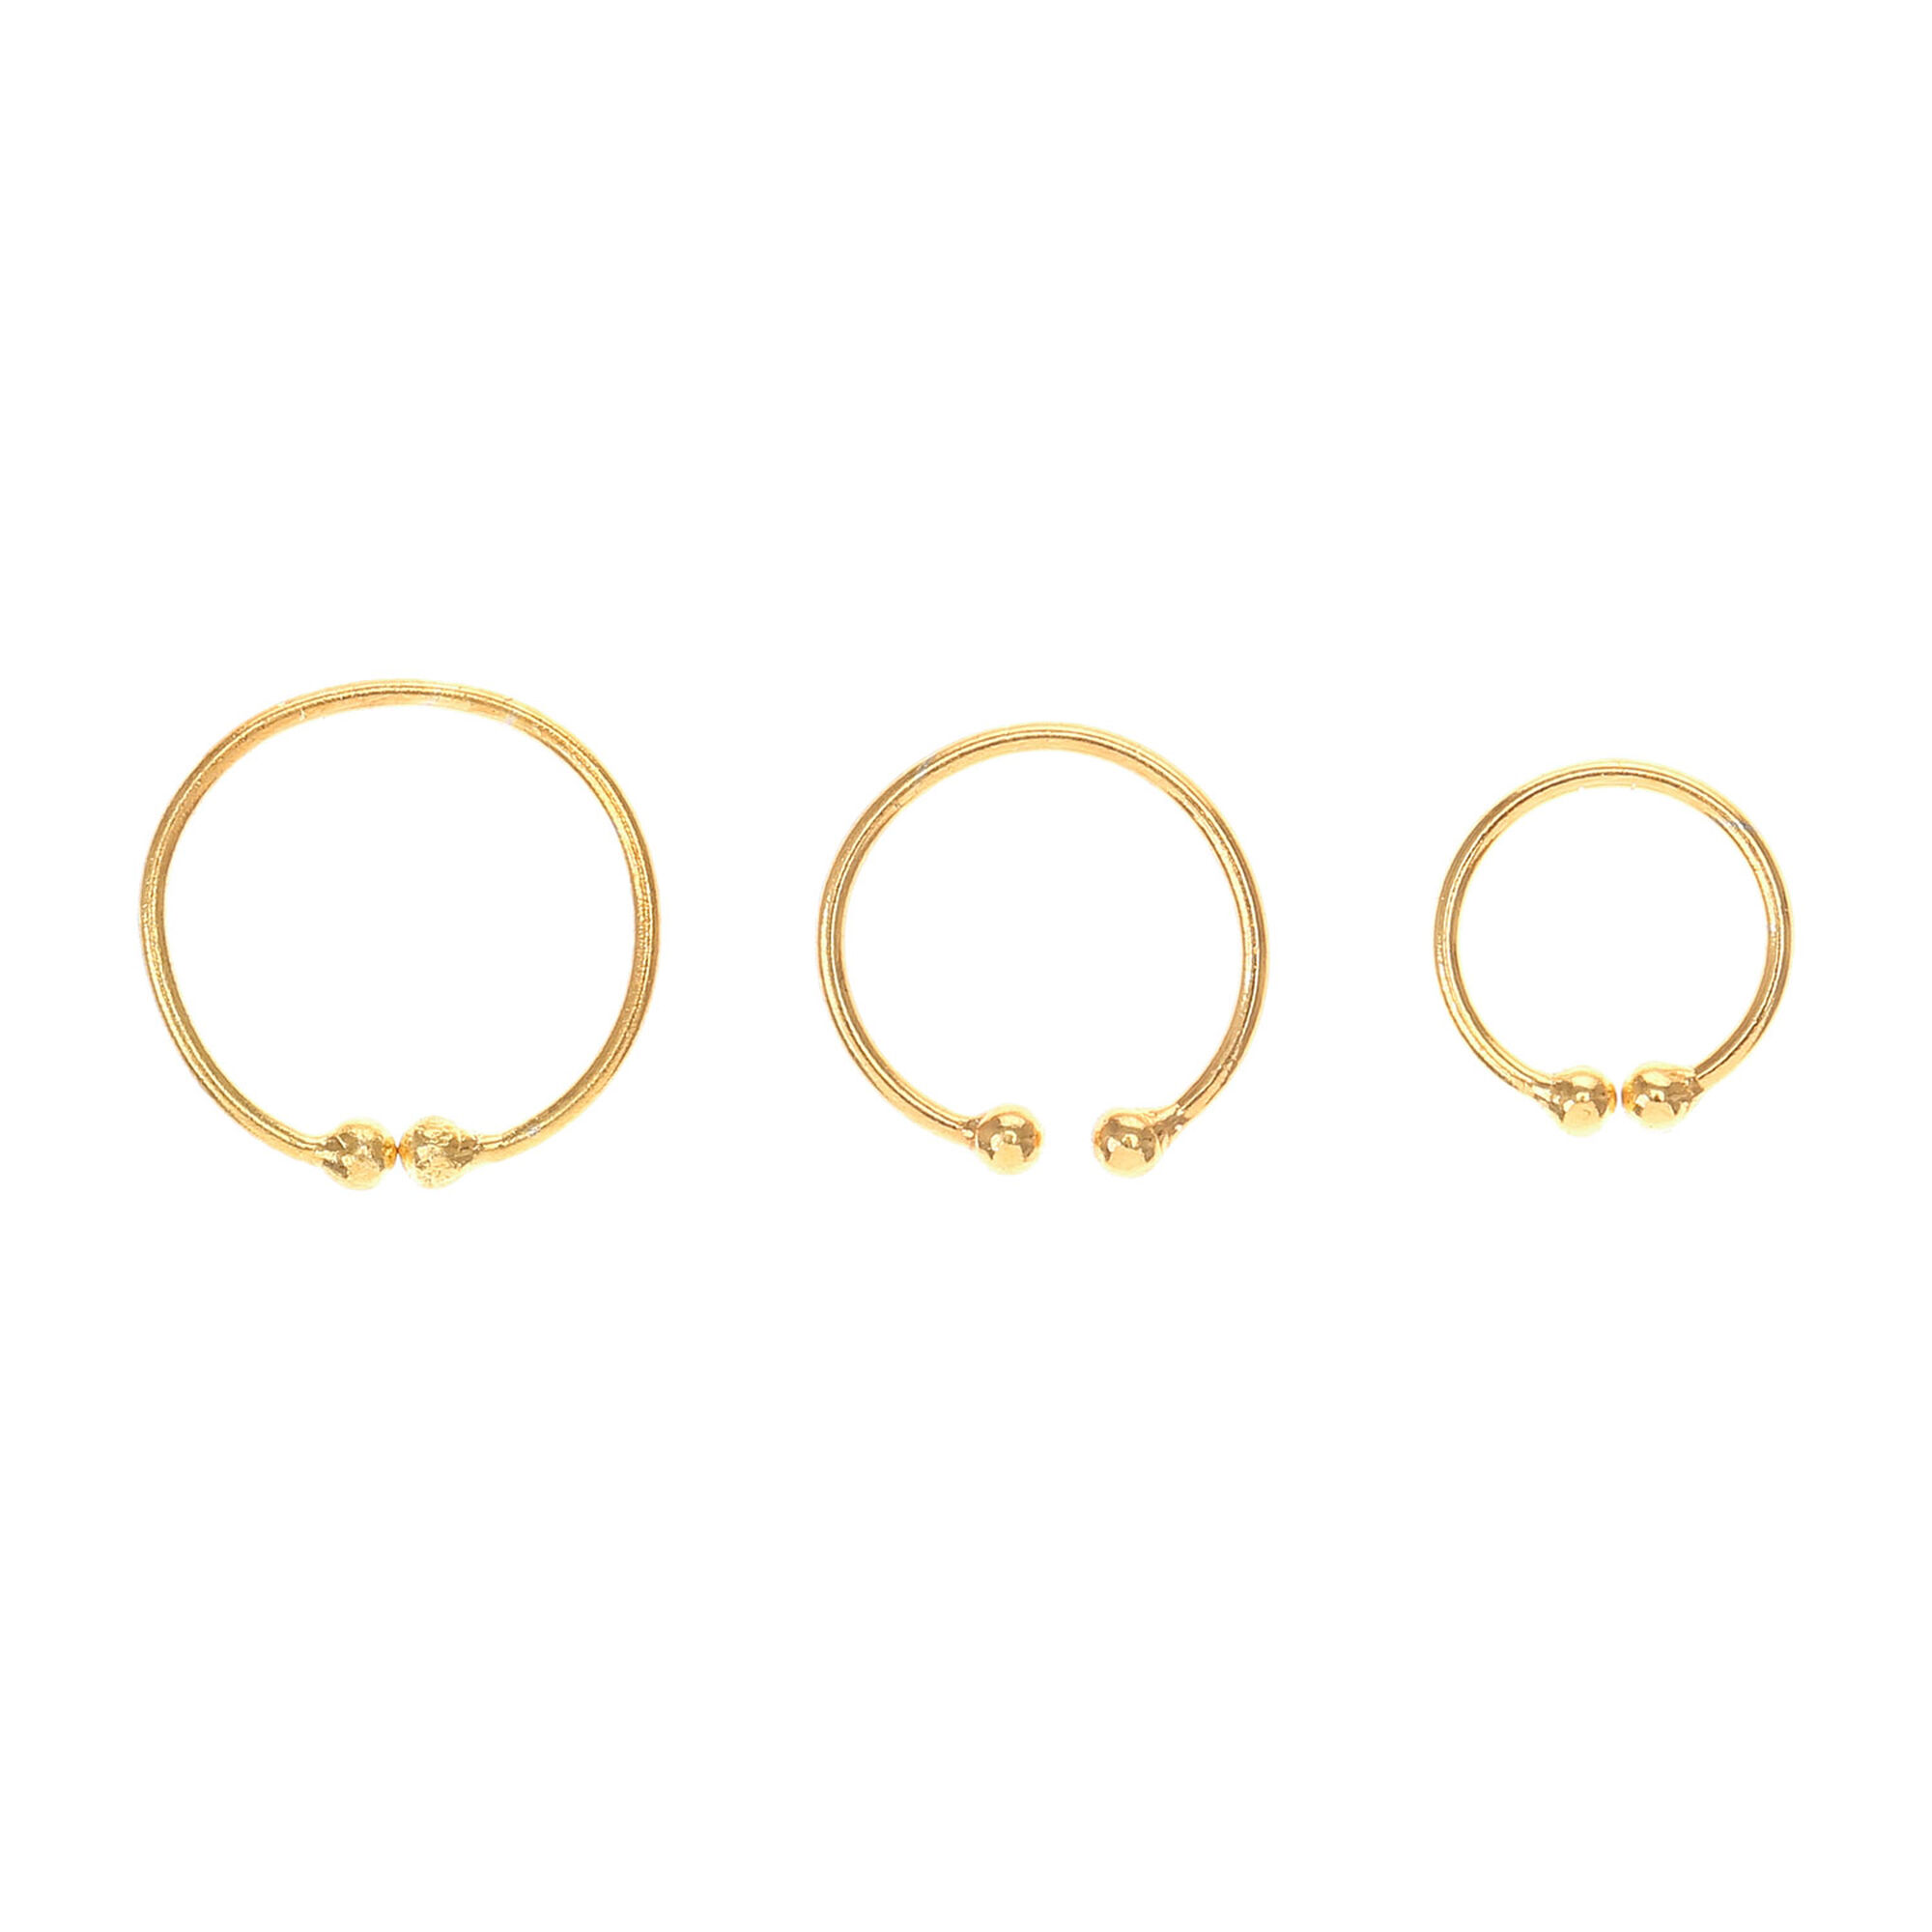 View Claires Tone Graduated Faux Hoop Nose Rings 3 Pack Gold information